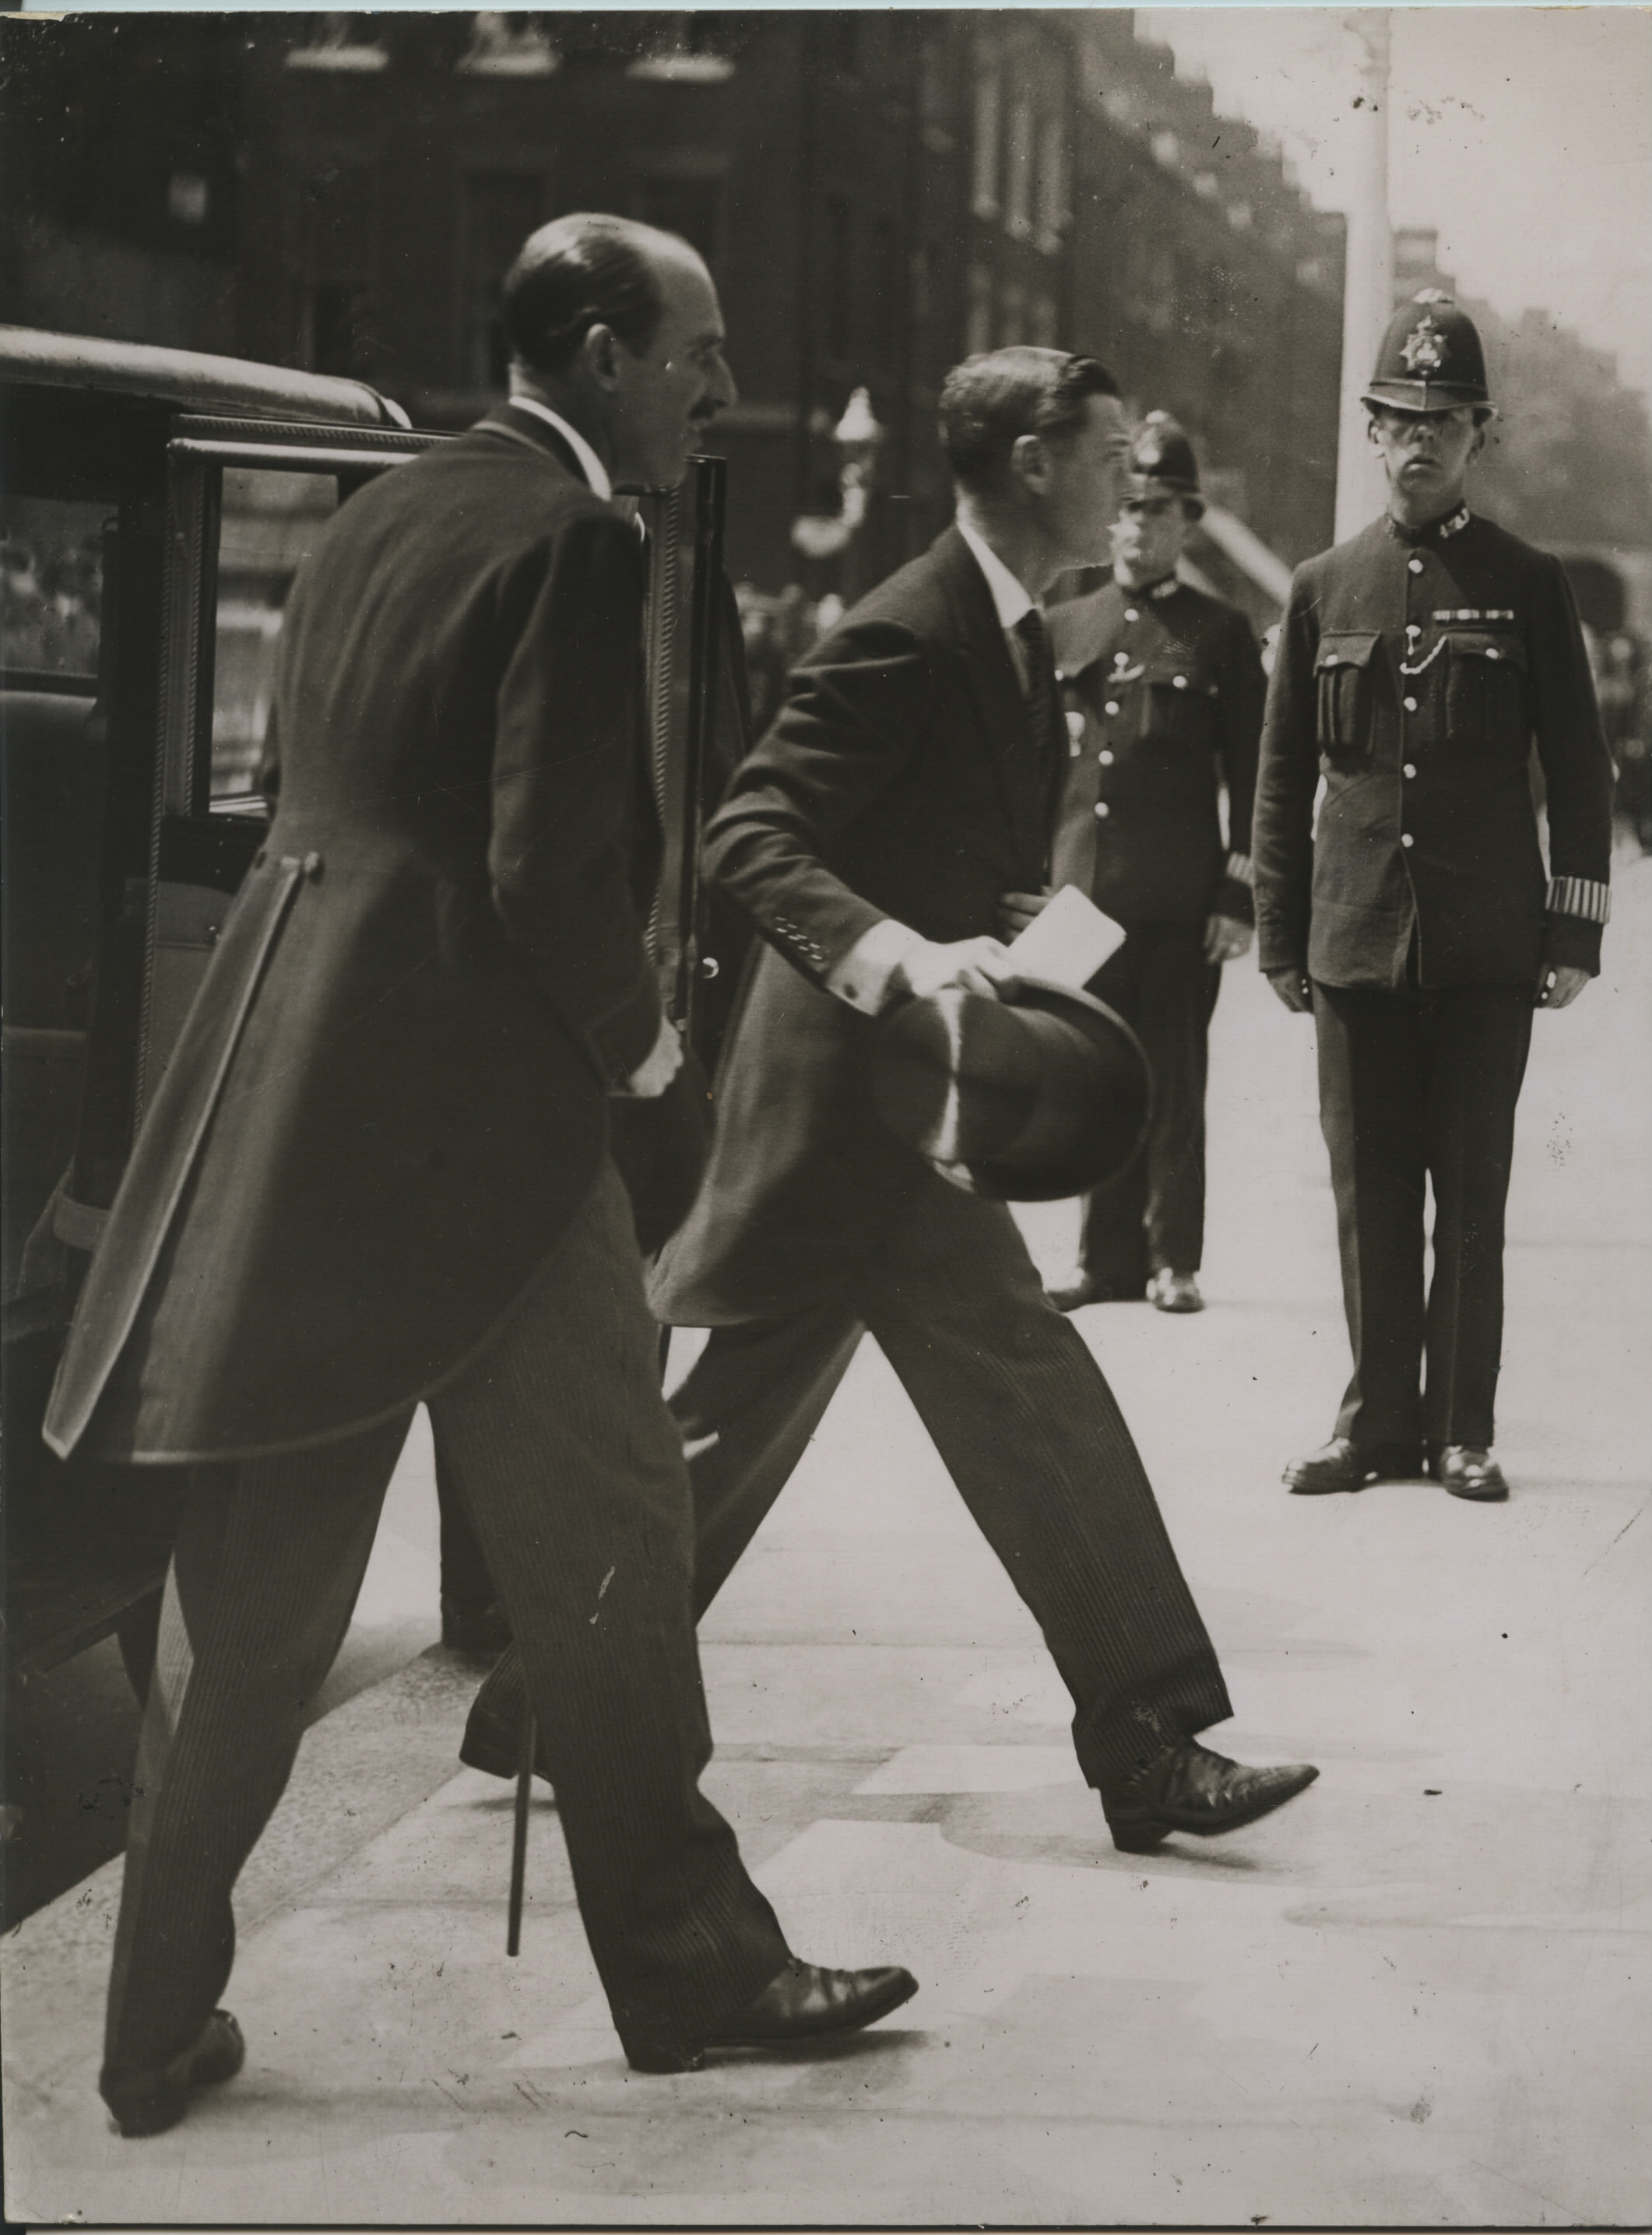 The Prince of Wales enters building 1929